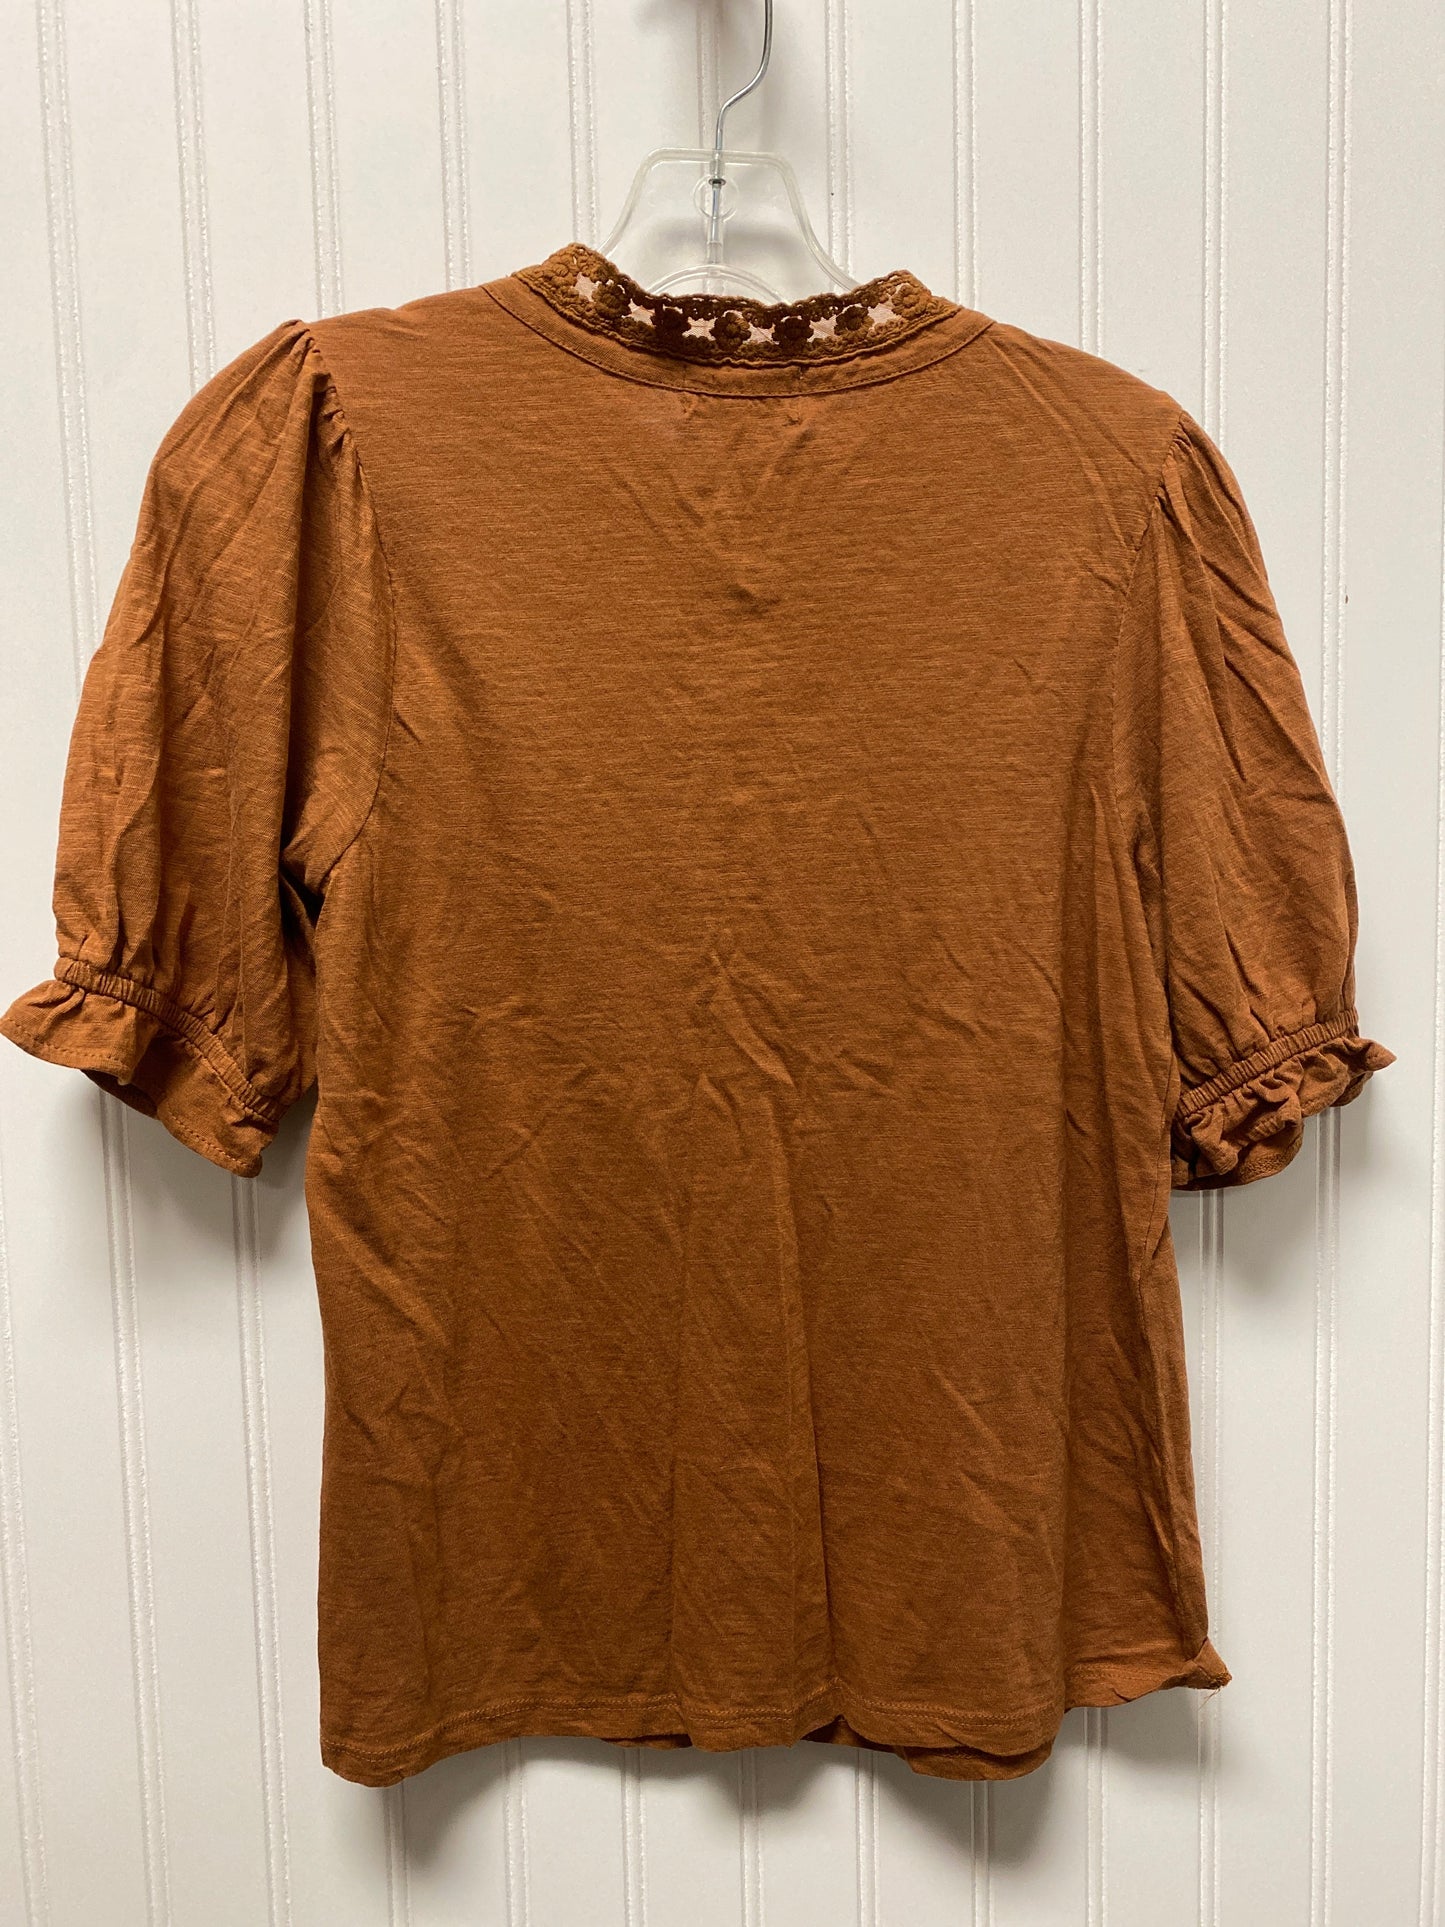 Brown Top Short Sleeve Lucky Brand, Size S